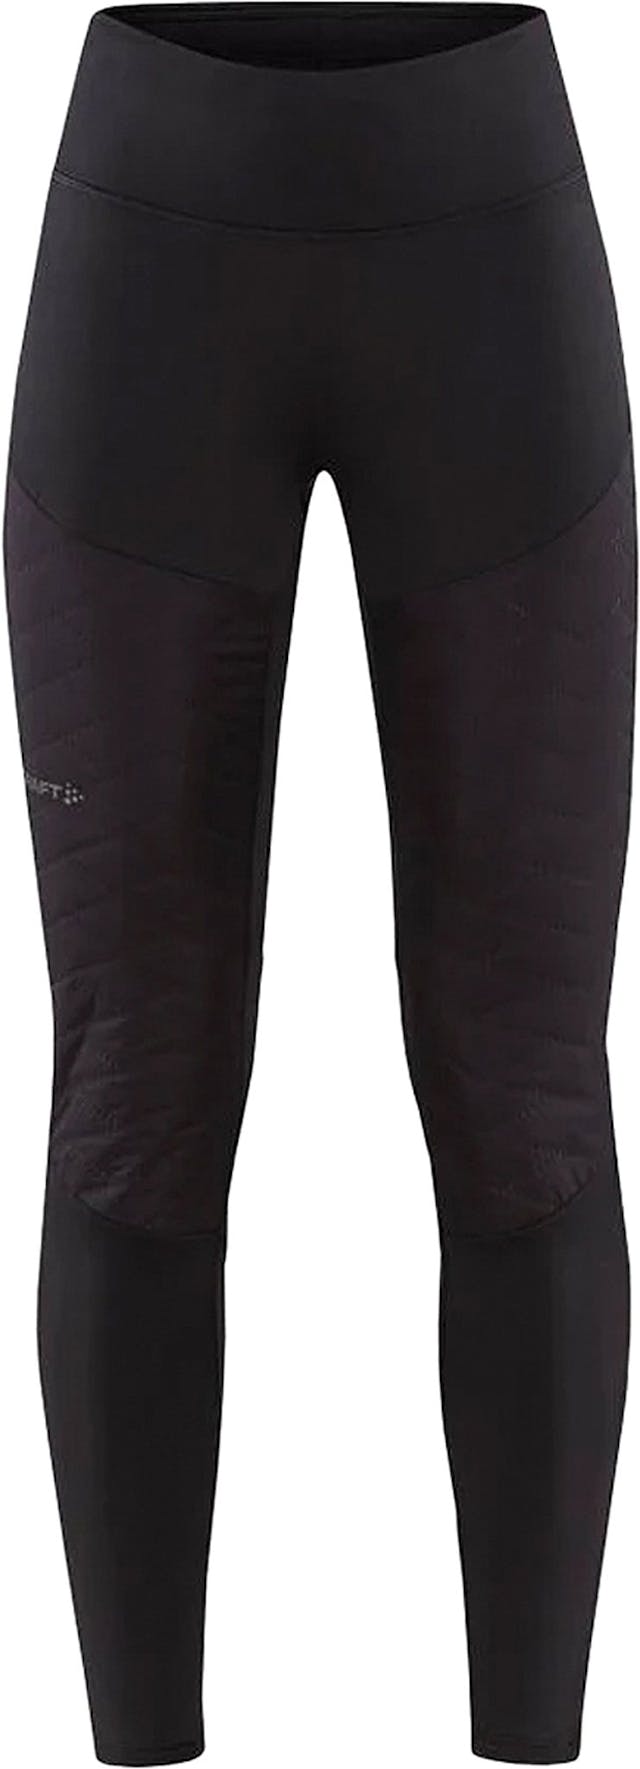 Product image for ADV SubZ 3 Tights - Women's